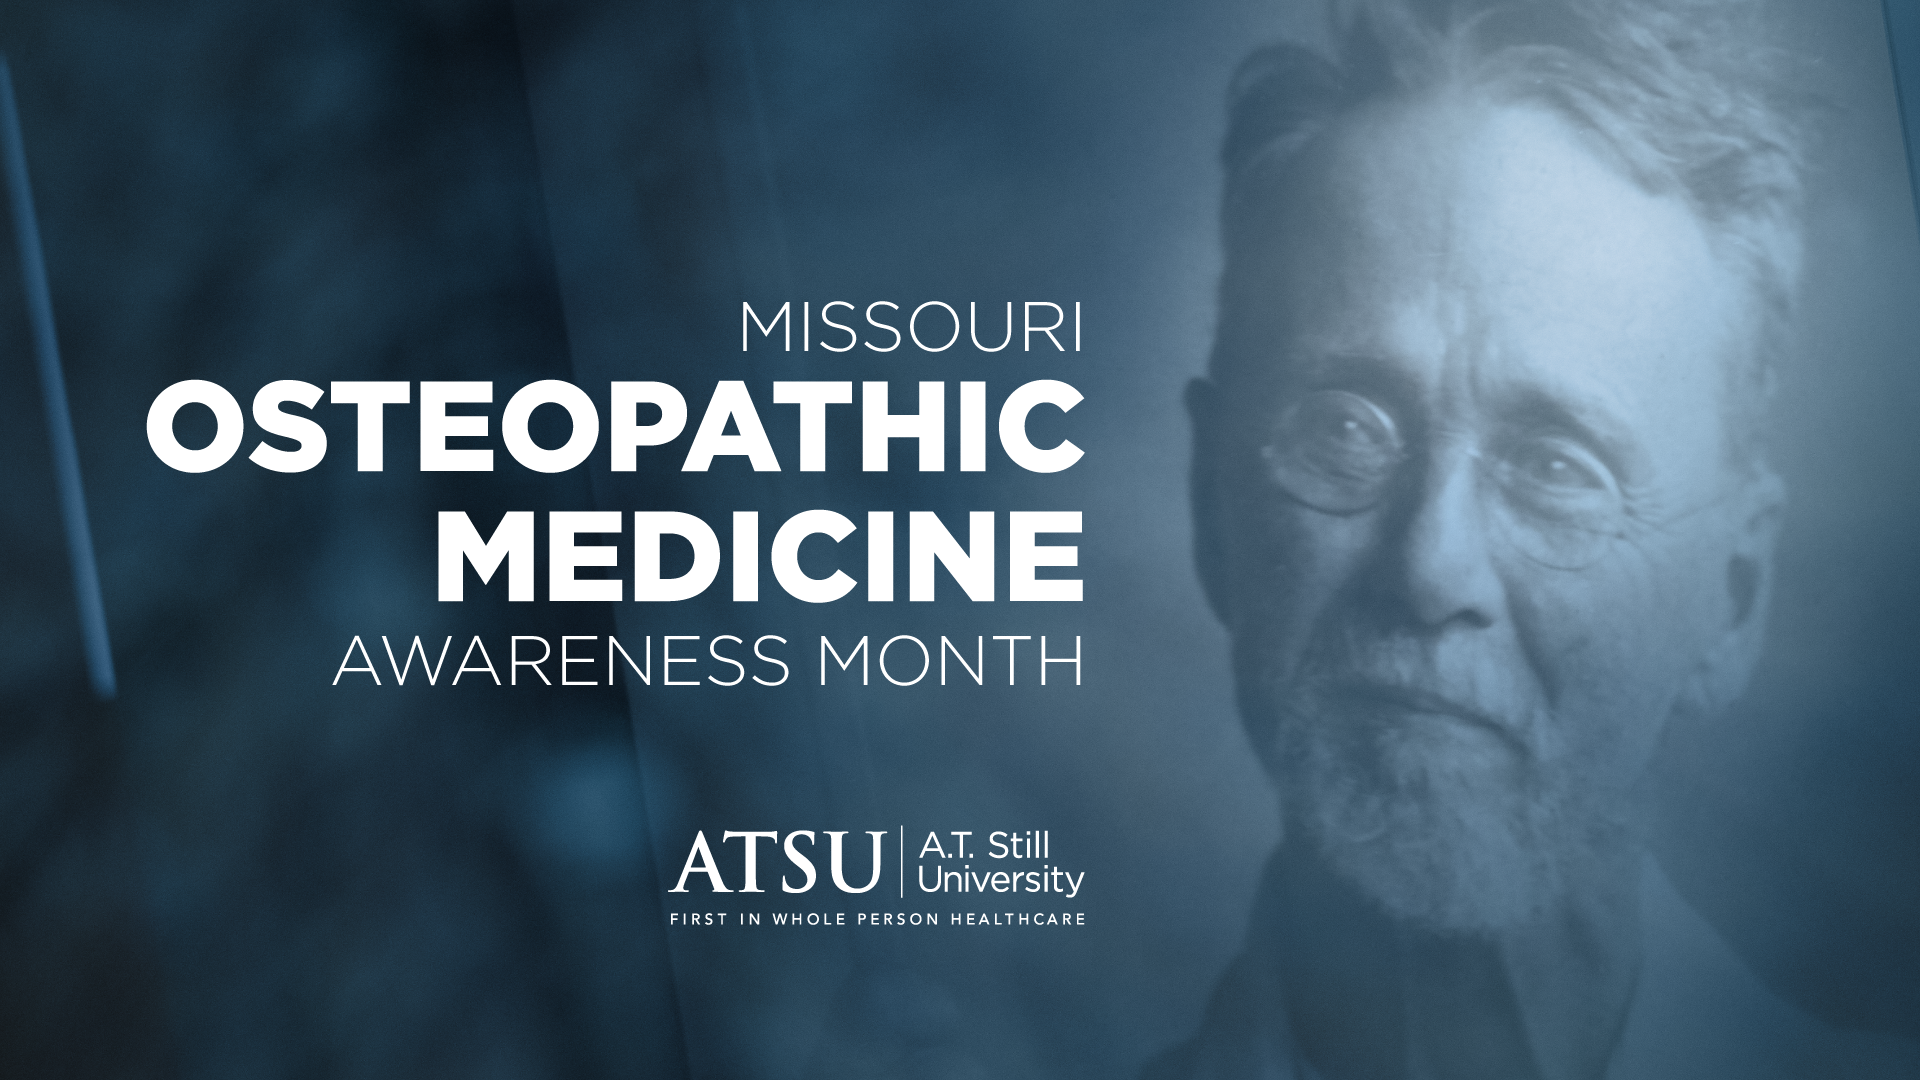 A graphic for Missouri Osteopathic Medicine Awareness Month